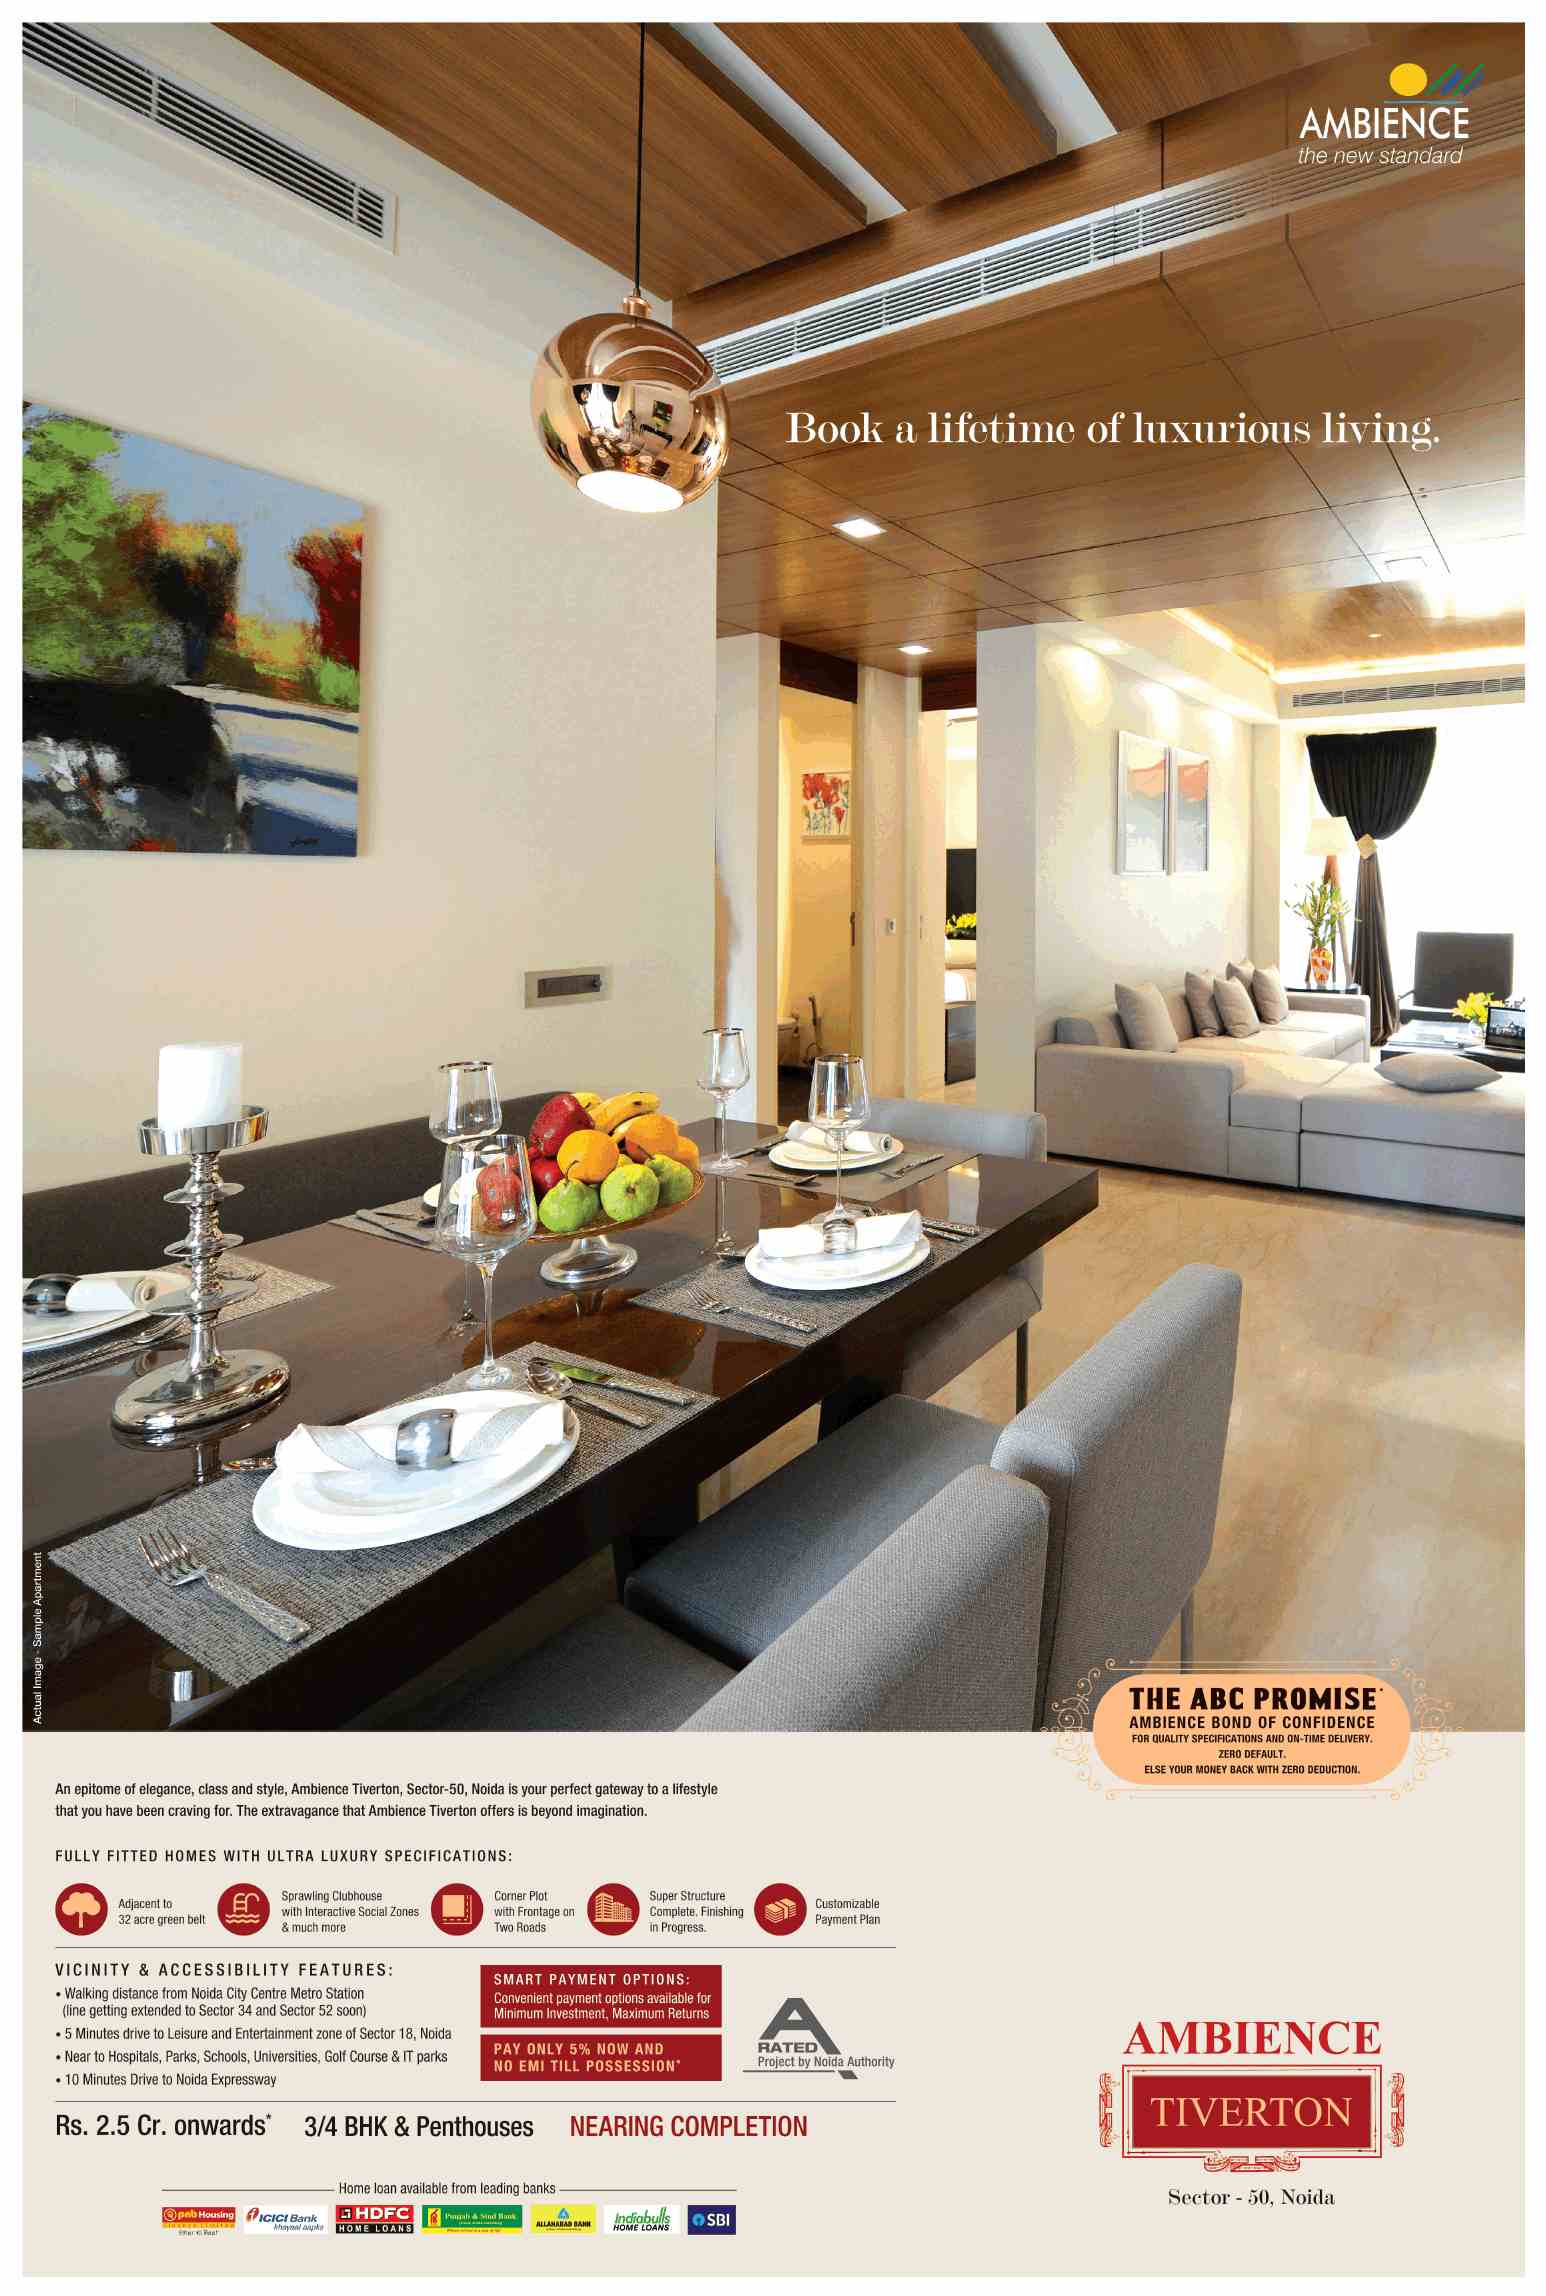 Book a lifetime of luxurious living at Ambience Tiverton in Noida Update